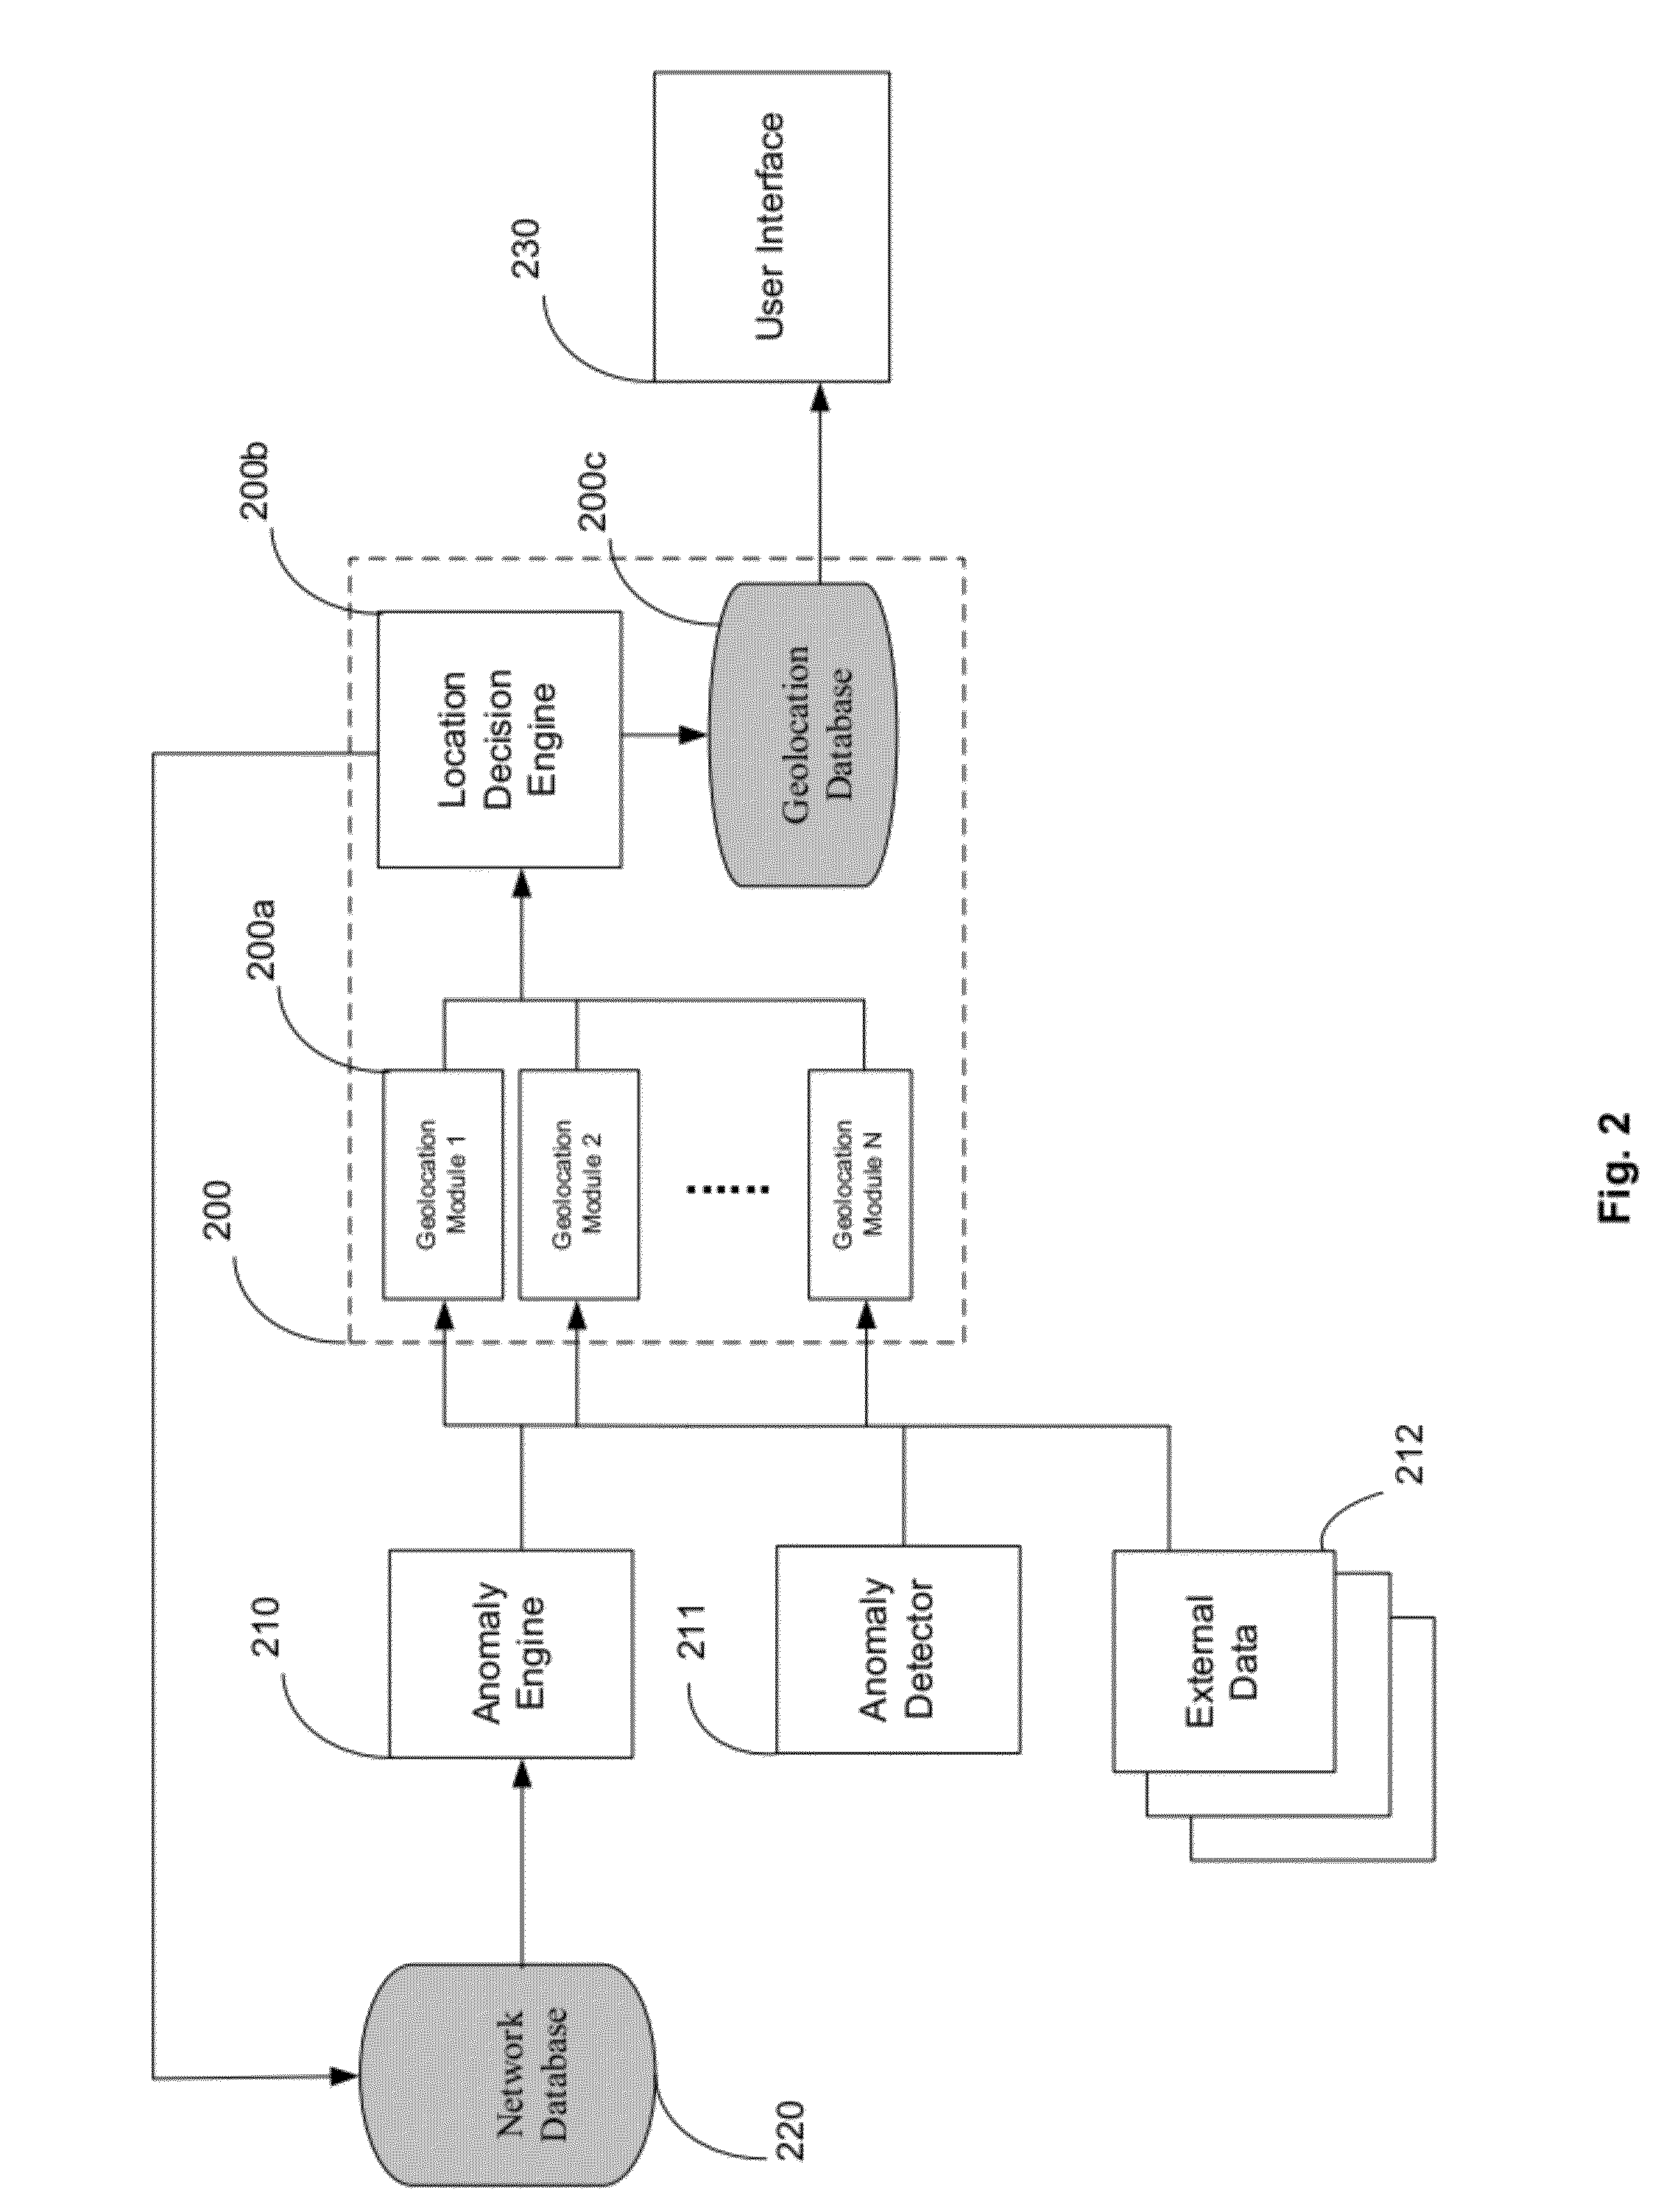 System and method for identifying likely geographical locations of anomalies in a water utility network